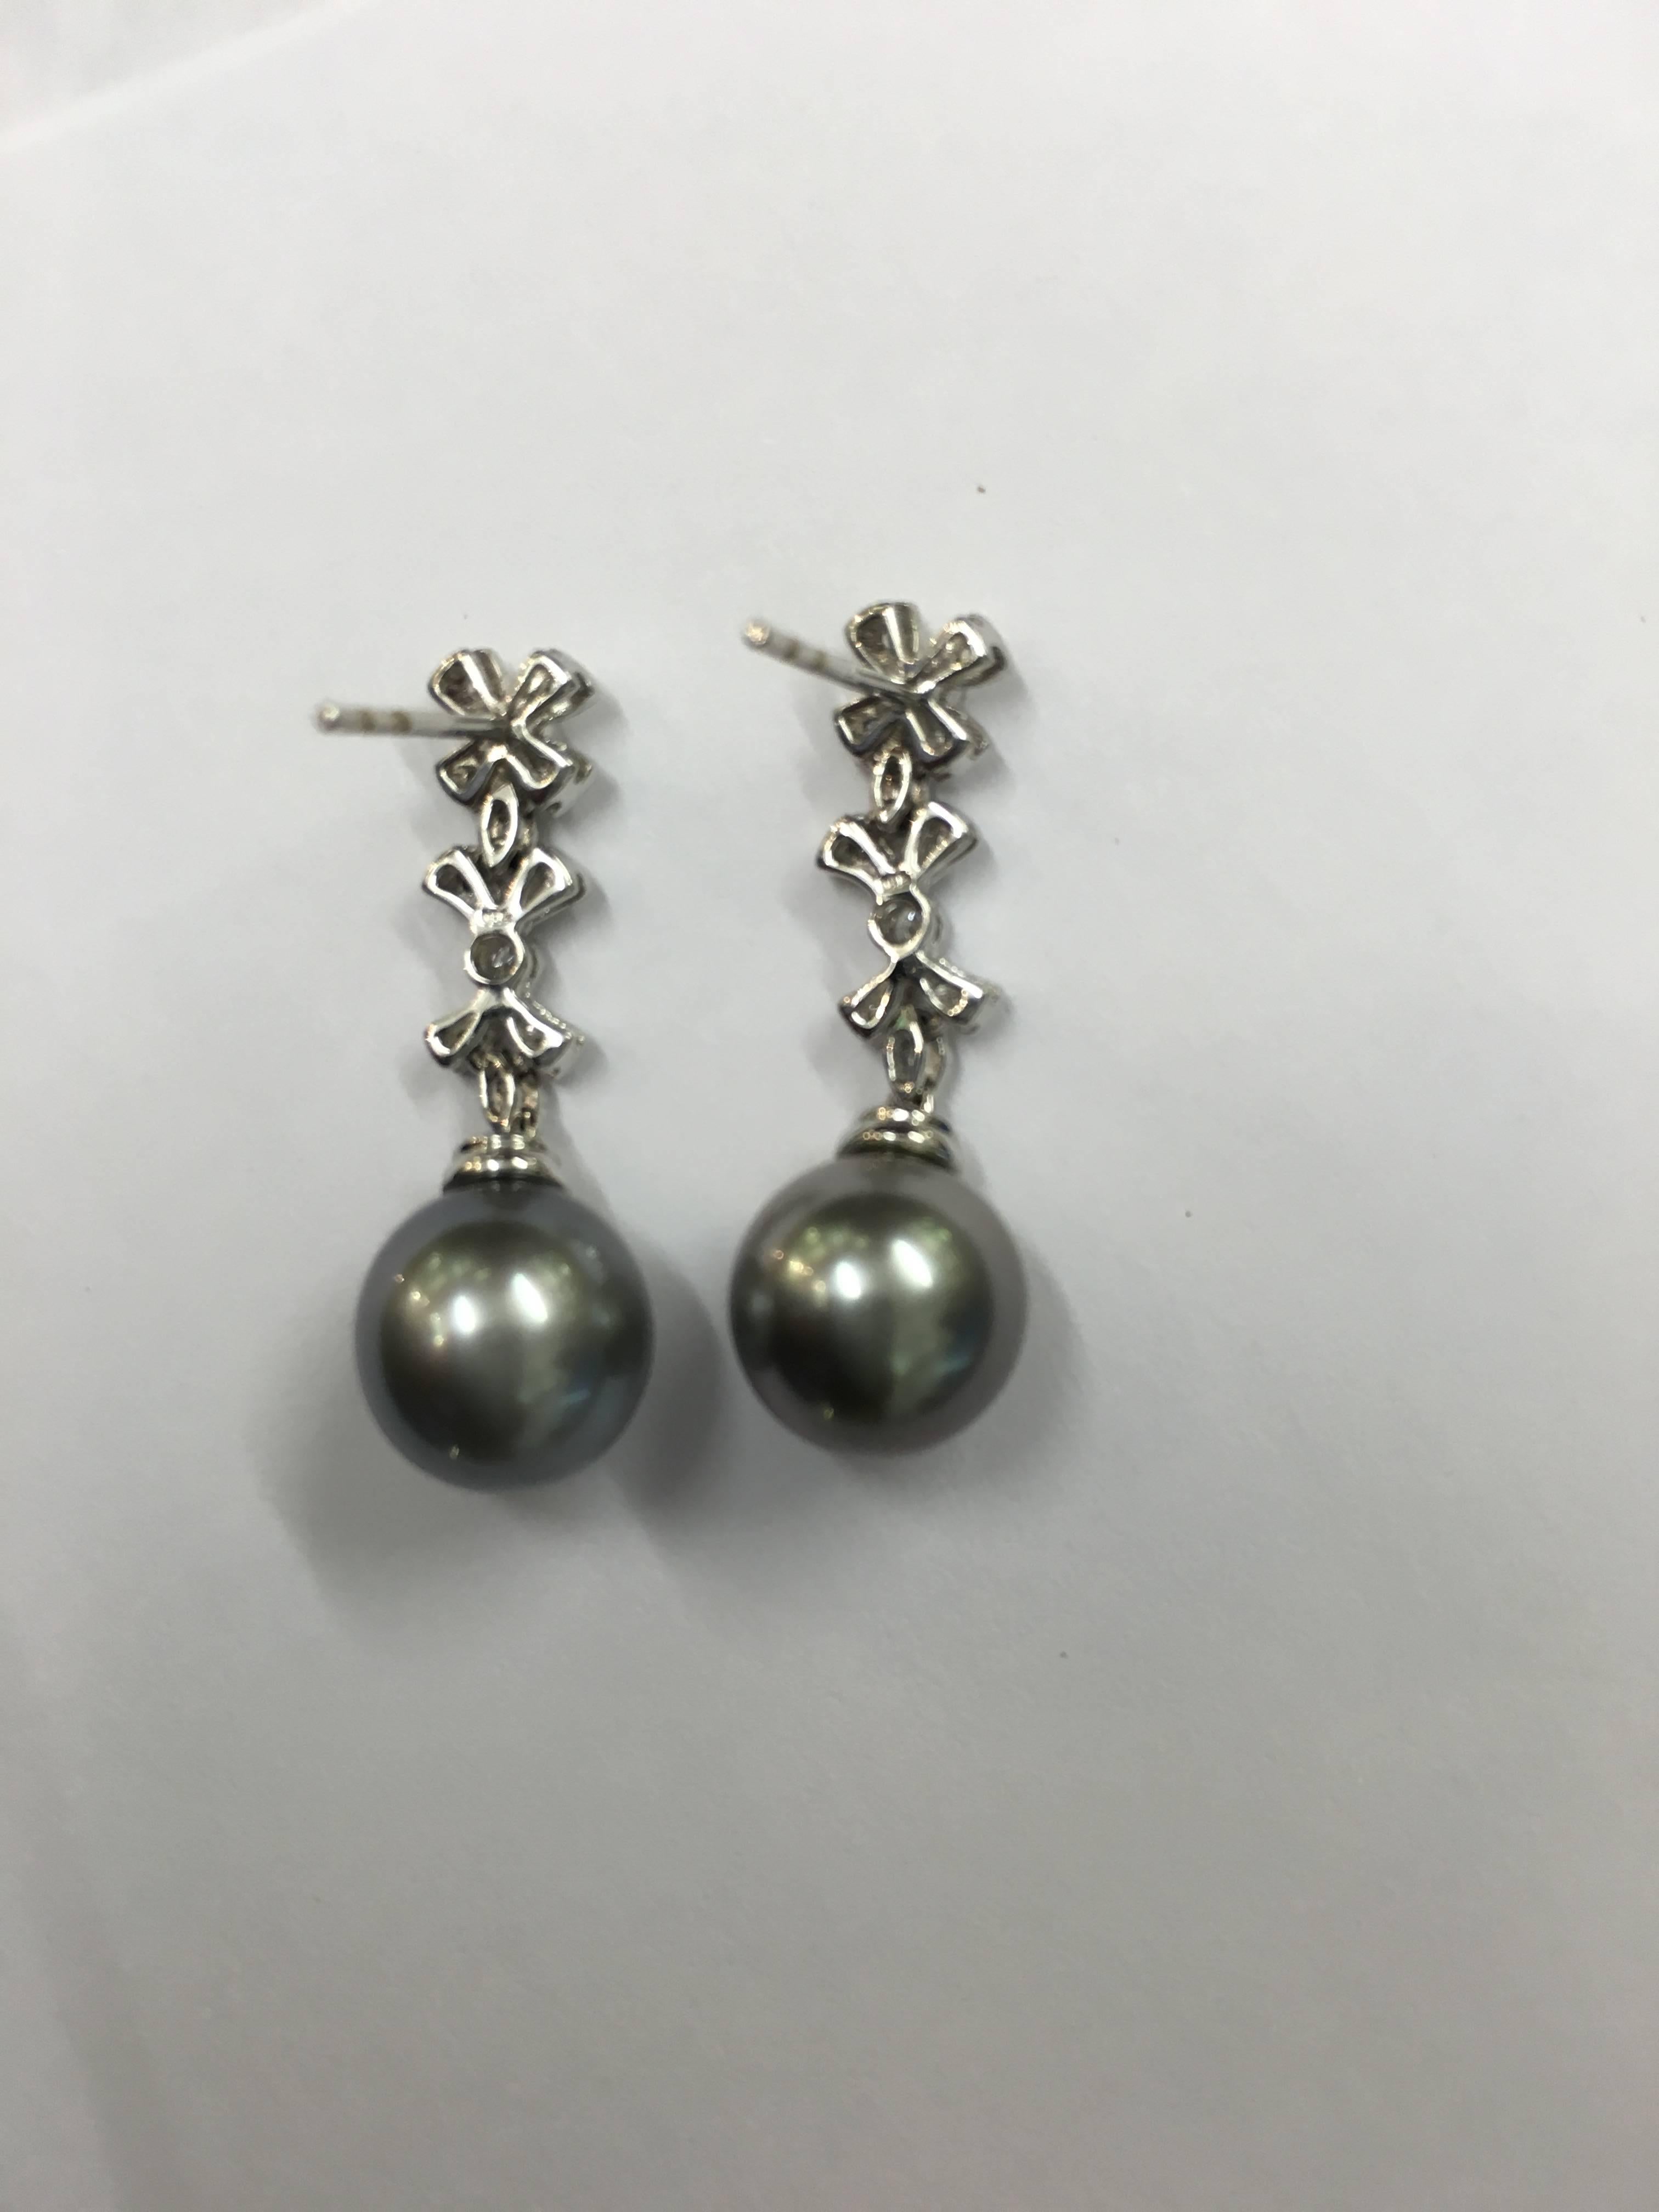 Diamond set 18ct White Gold Drops with Grey Tahitian pearls for pierced ears
with post and butterfly fittings. Set with white diamonds 